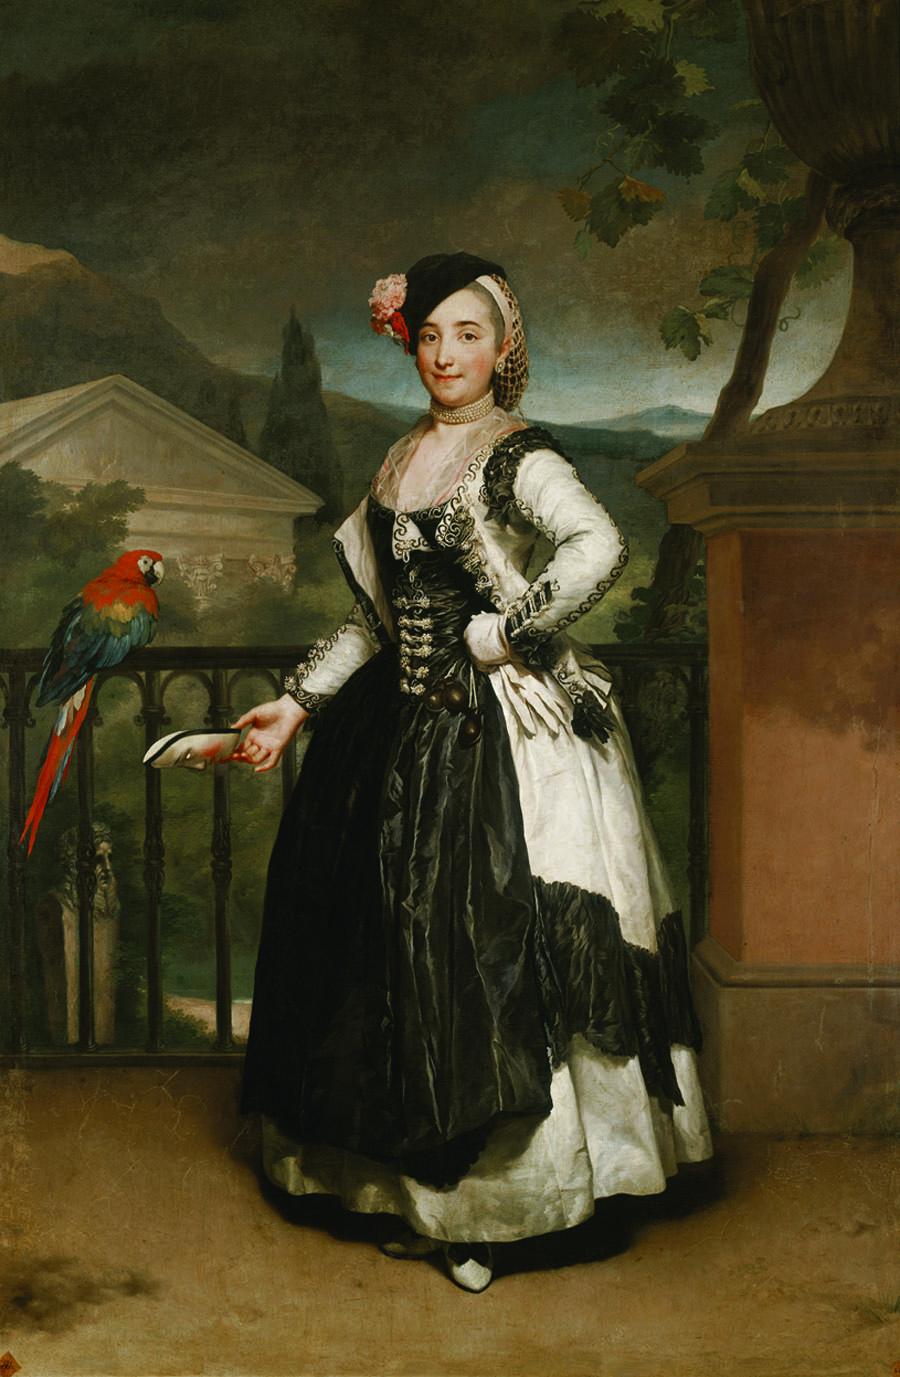 Full body portrait painting of woman wearing gown and hat standing in front of a railing next to parrot.